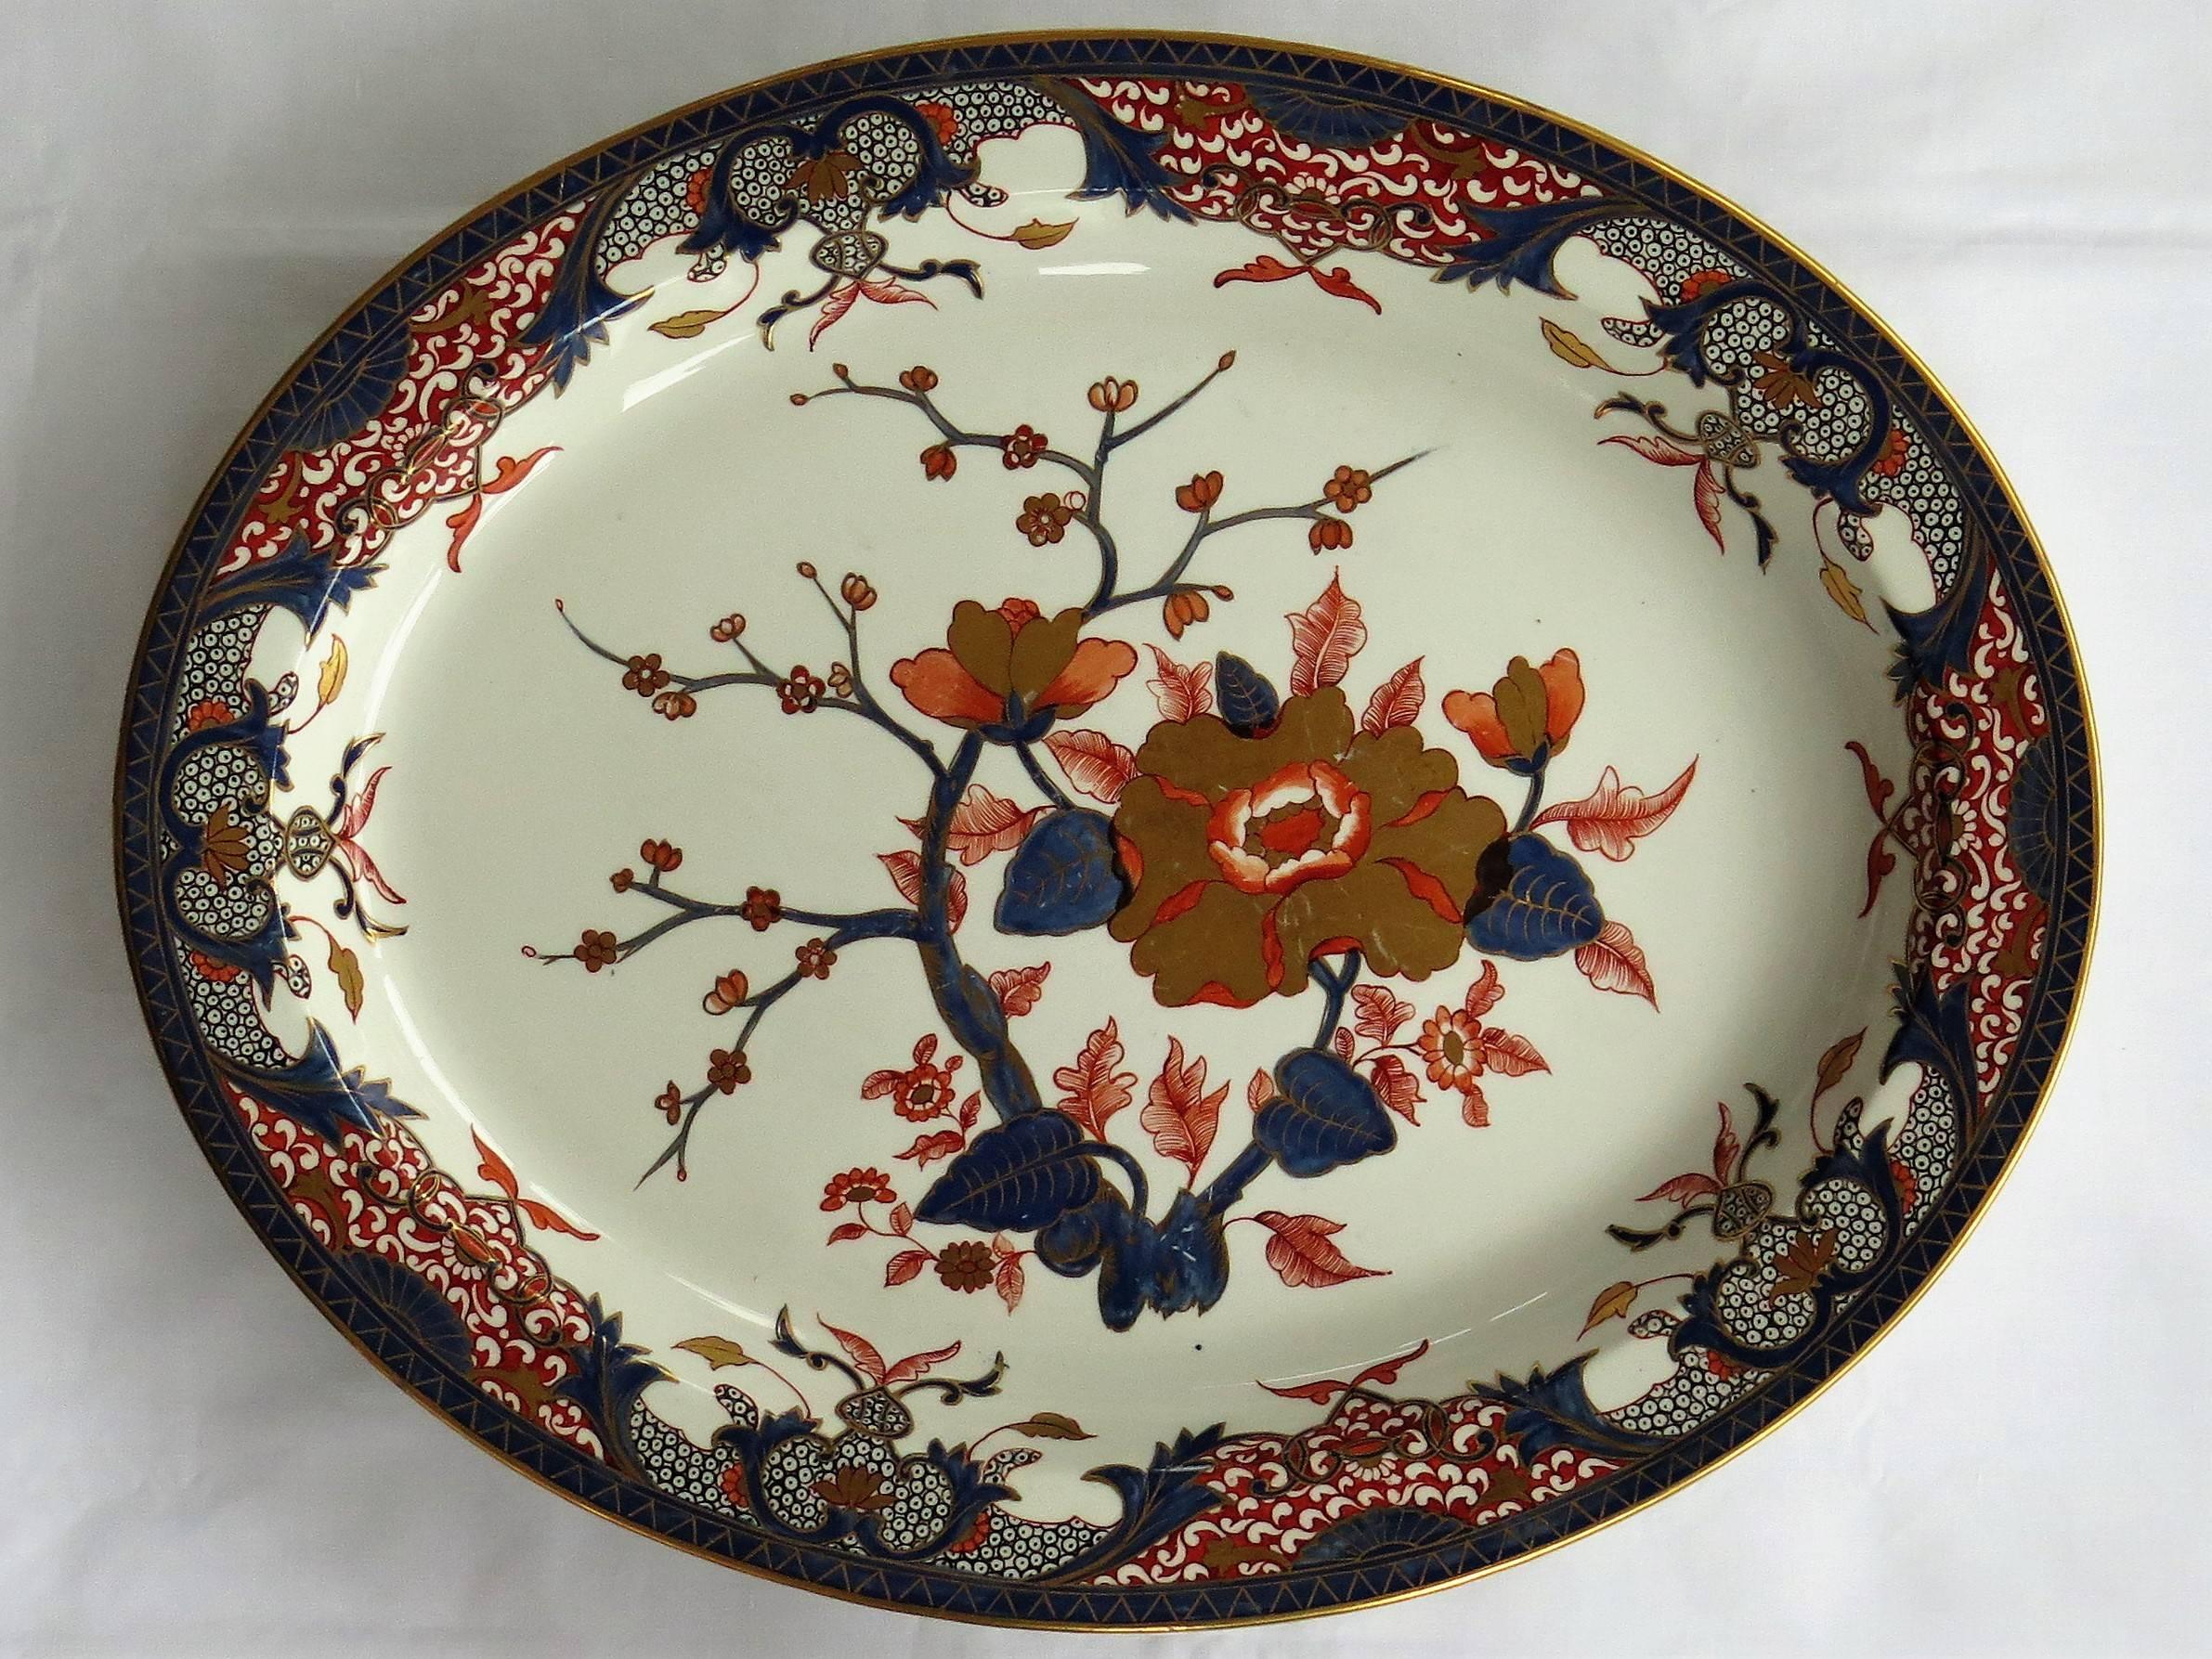 This is a rare and early Derby Porcelain large dish, platter or meat plate from the late 18th century, George III period, circa 1790.

The platter is oval in shape and is beautifully hand-painted in one of Derby's chinoiserie, Imari patterns called;